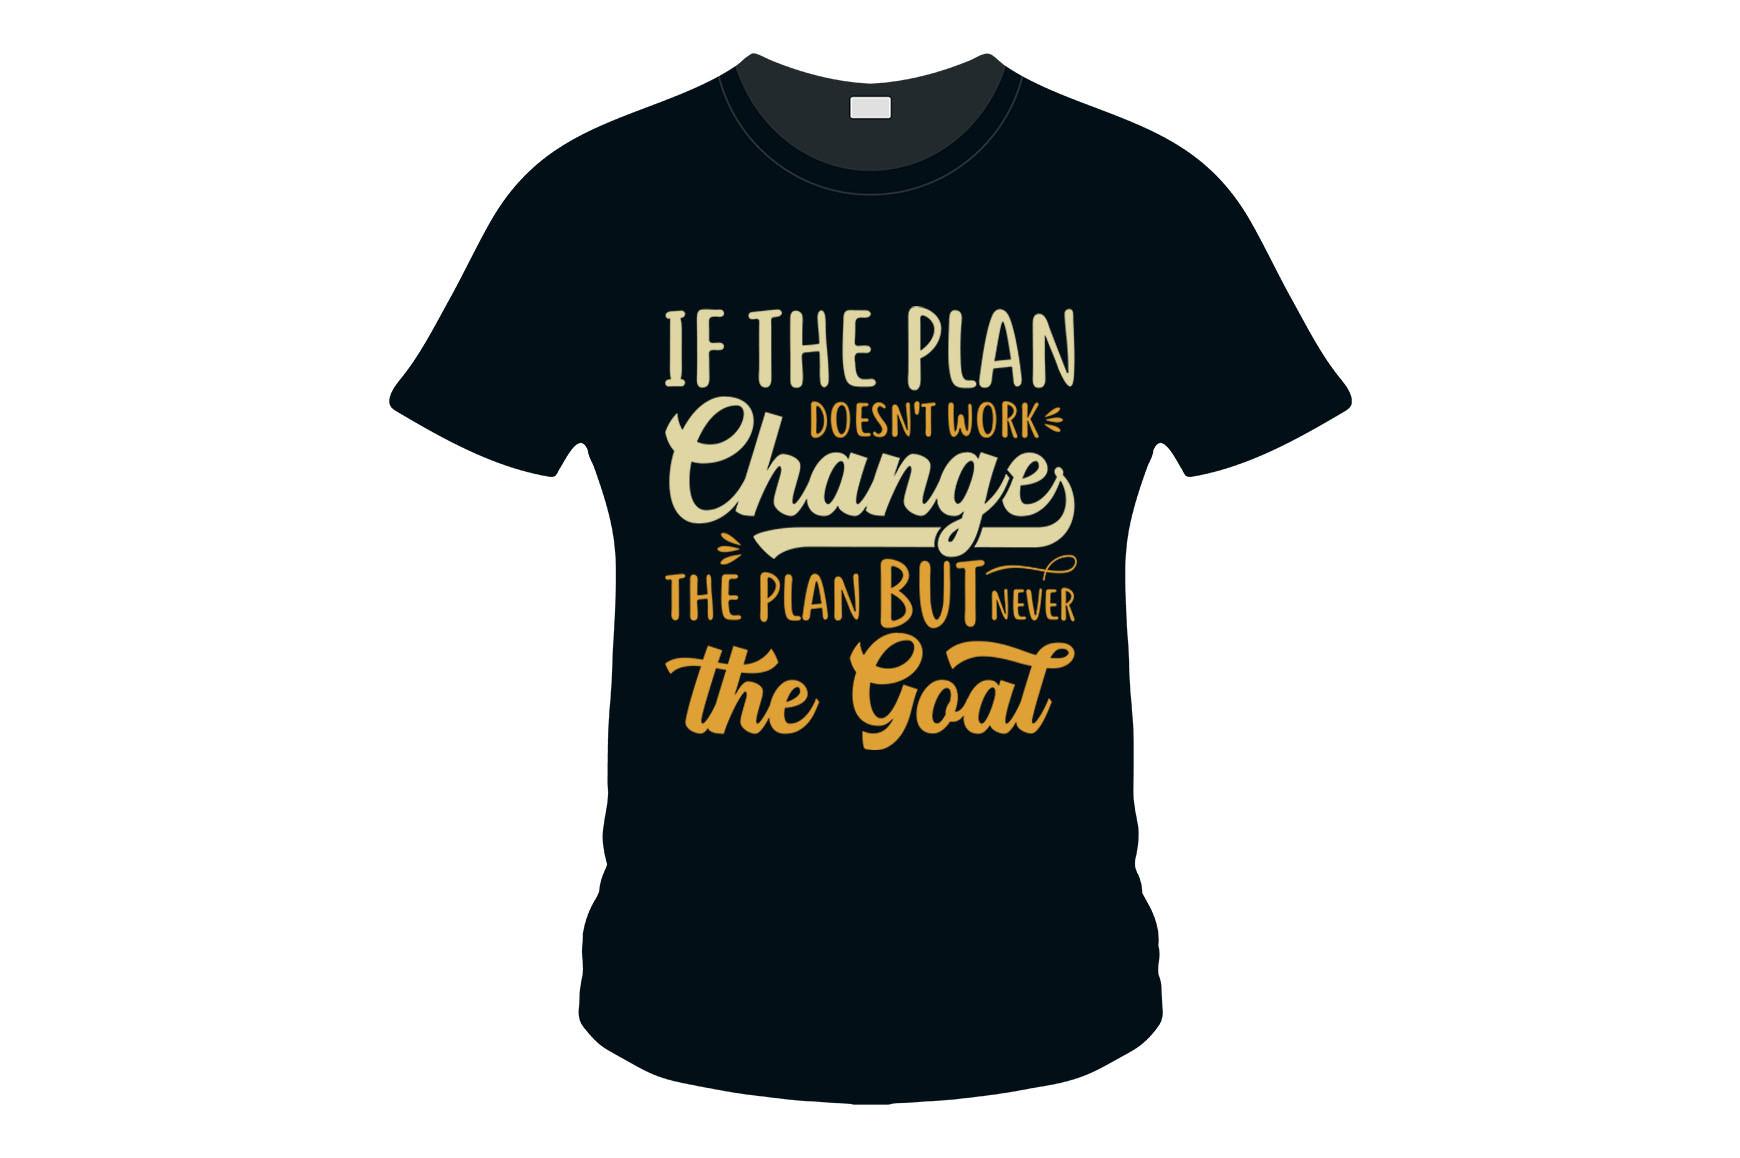 If the Plan Doesn't Work Change the Plan